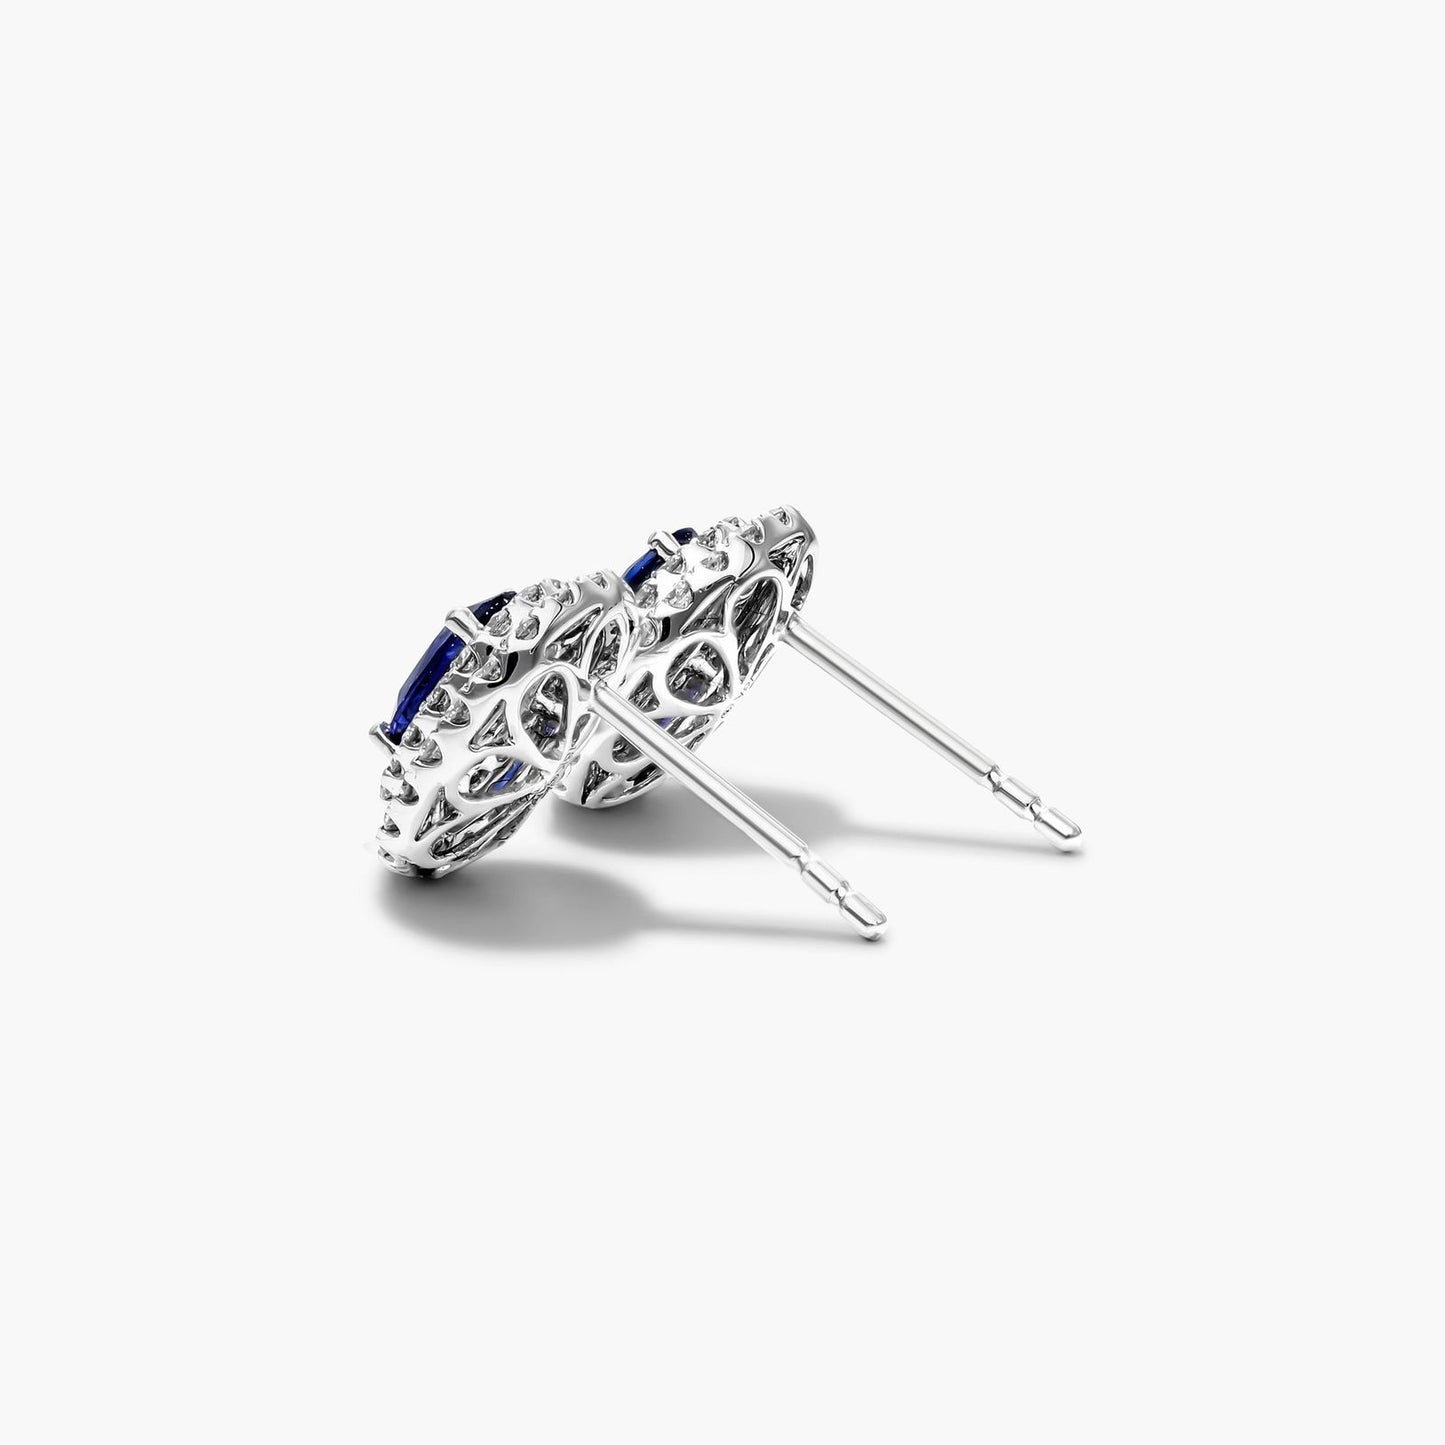 18K White Gold Double Halo Oval Sapphire And Diamond Earrings